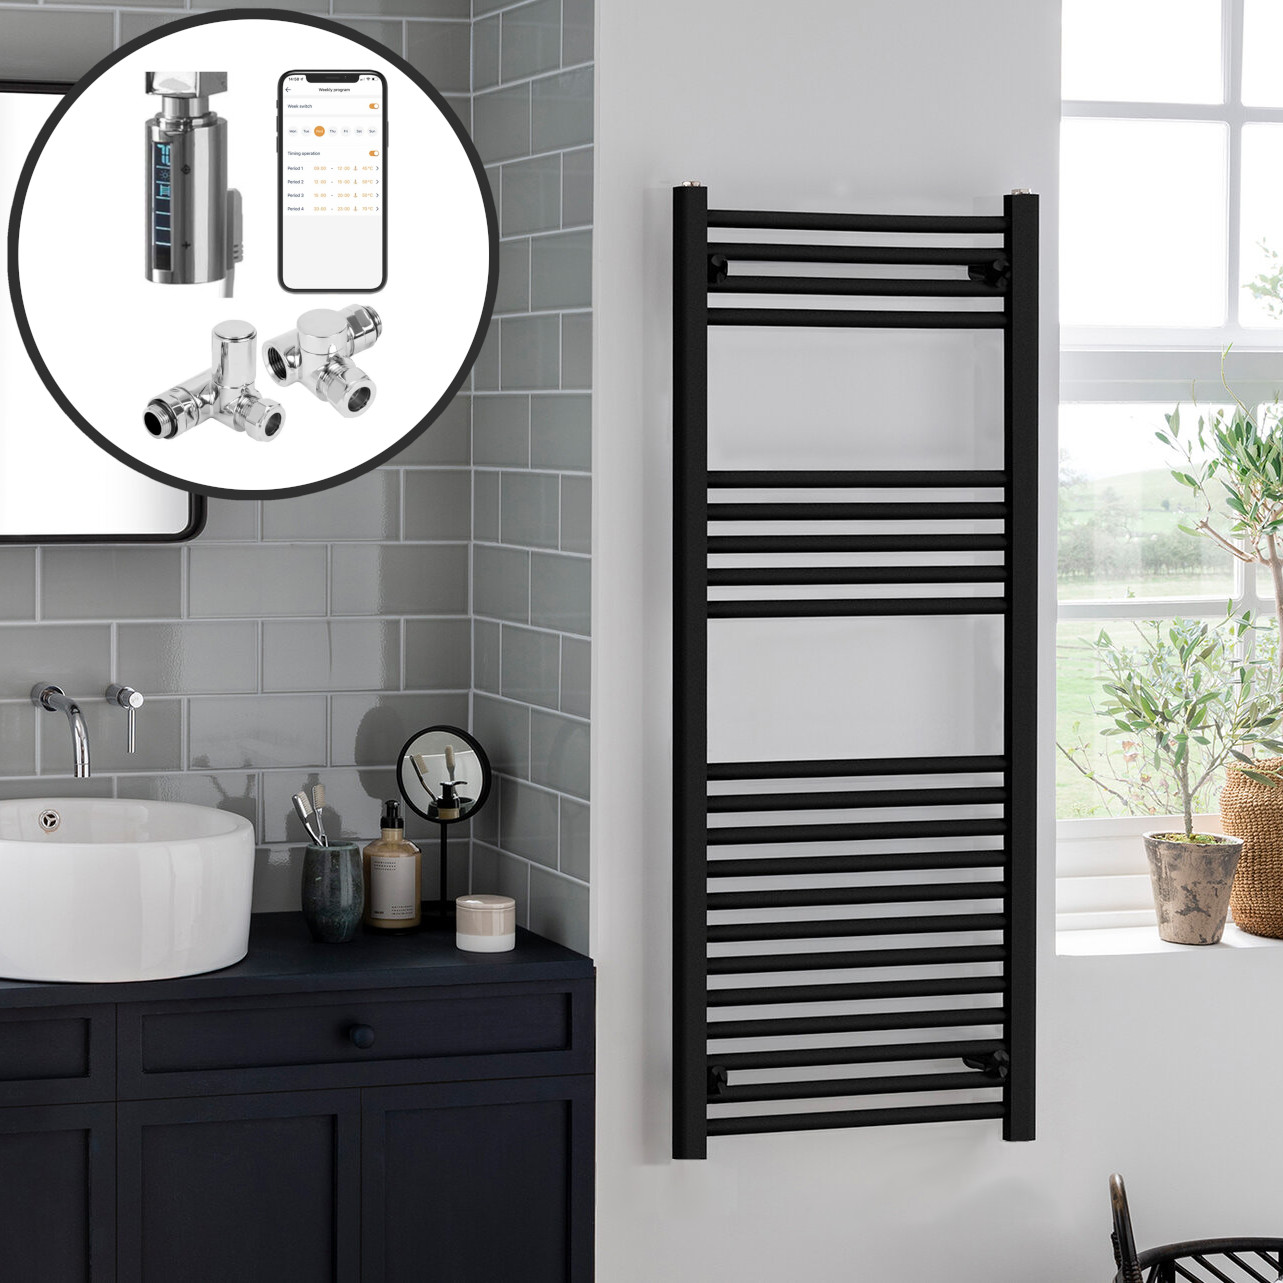 Bray Black | Dual Fuel Towel Rail with Thermostat, Timer + WiFi Control Best Quality & Price, Energy Saving / Economic To Run Buy Online From Adax SolAire UK Shop